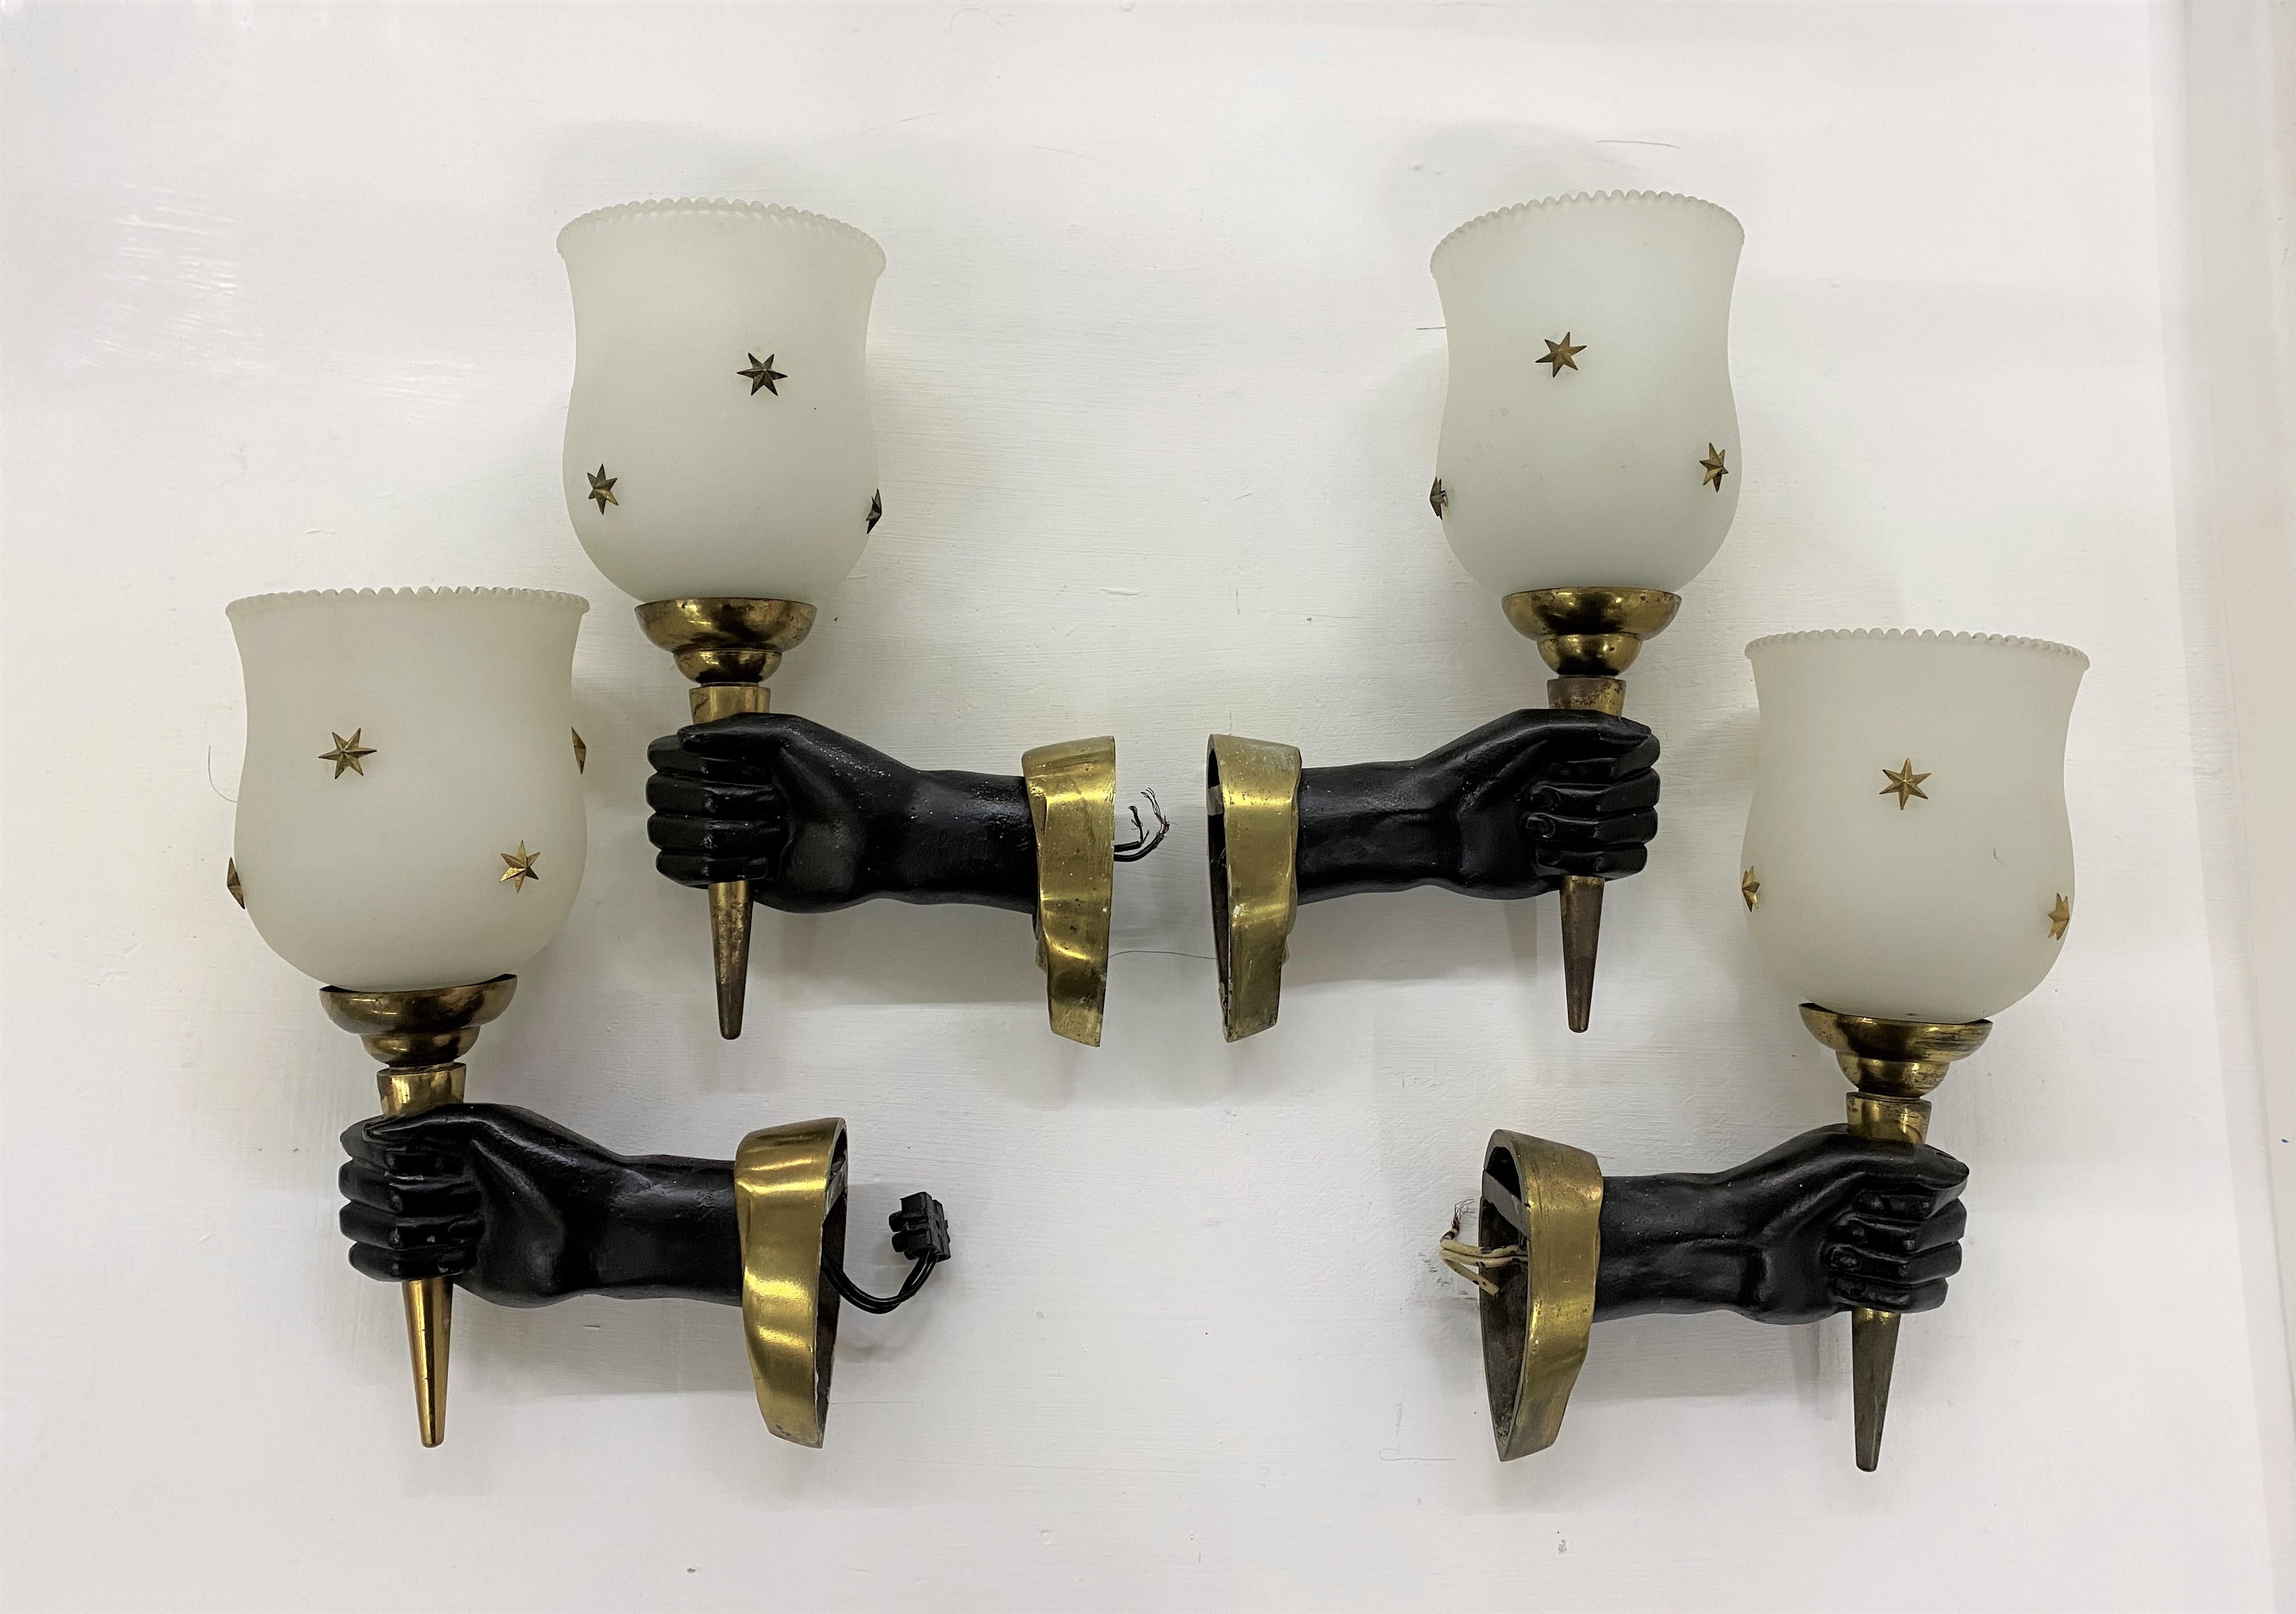 Gorgeous sconces or wall lights produced by Maison Arlus in gilt bronze and opaline glass.
Made in France, circa 1950s.
These are 